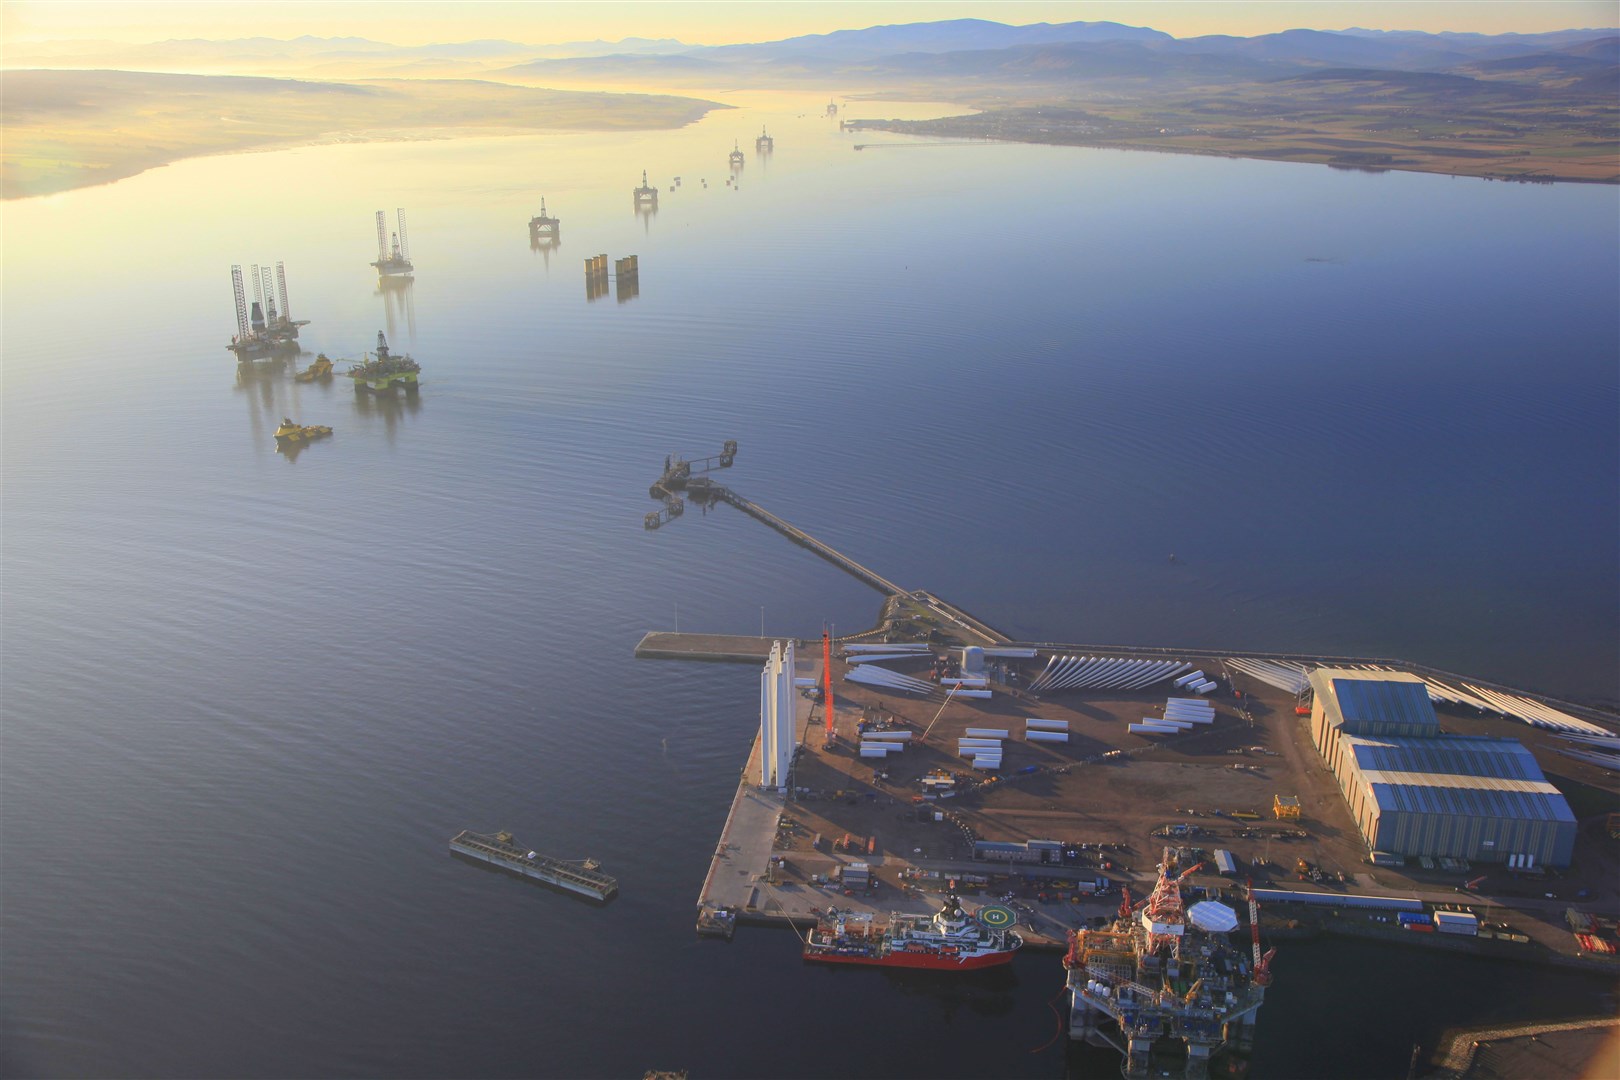 The Global Energy Group has a major interest in the Cromarty Firth.